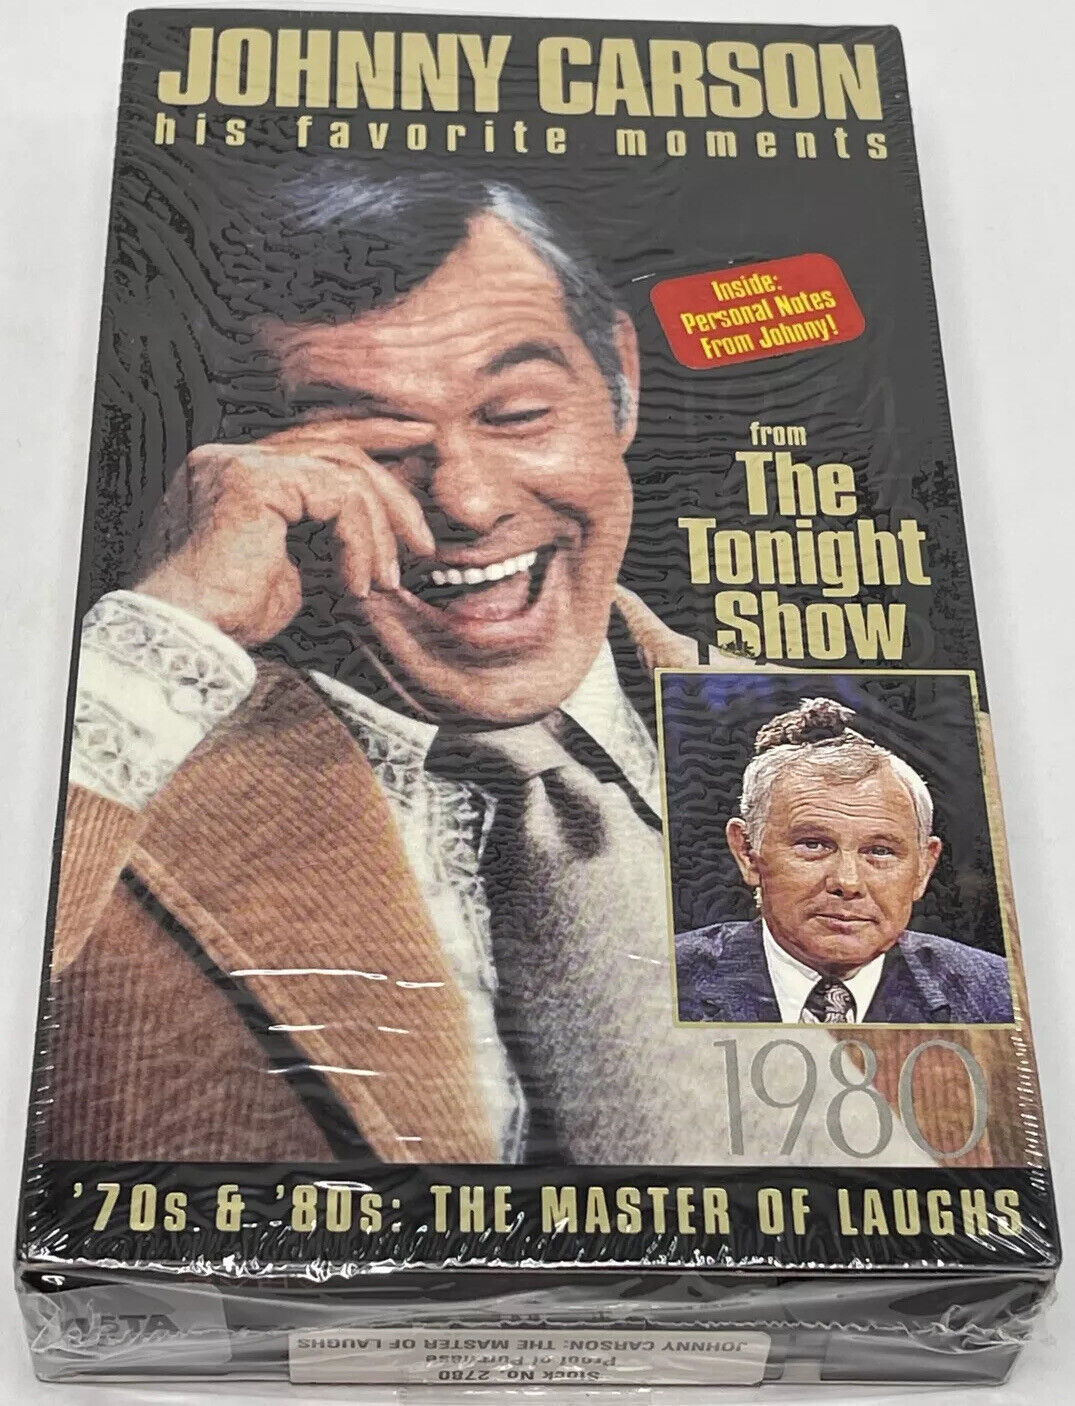 Primary image for Johnny Carson His Favorite Moments The Tonight Show Vol 2 - 70s 80s VHS SEALED